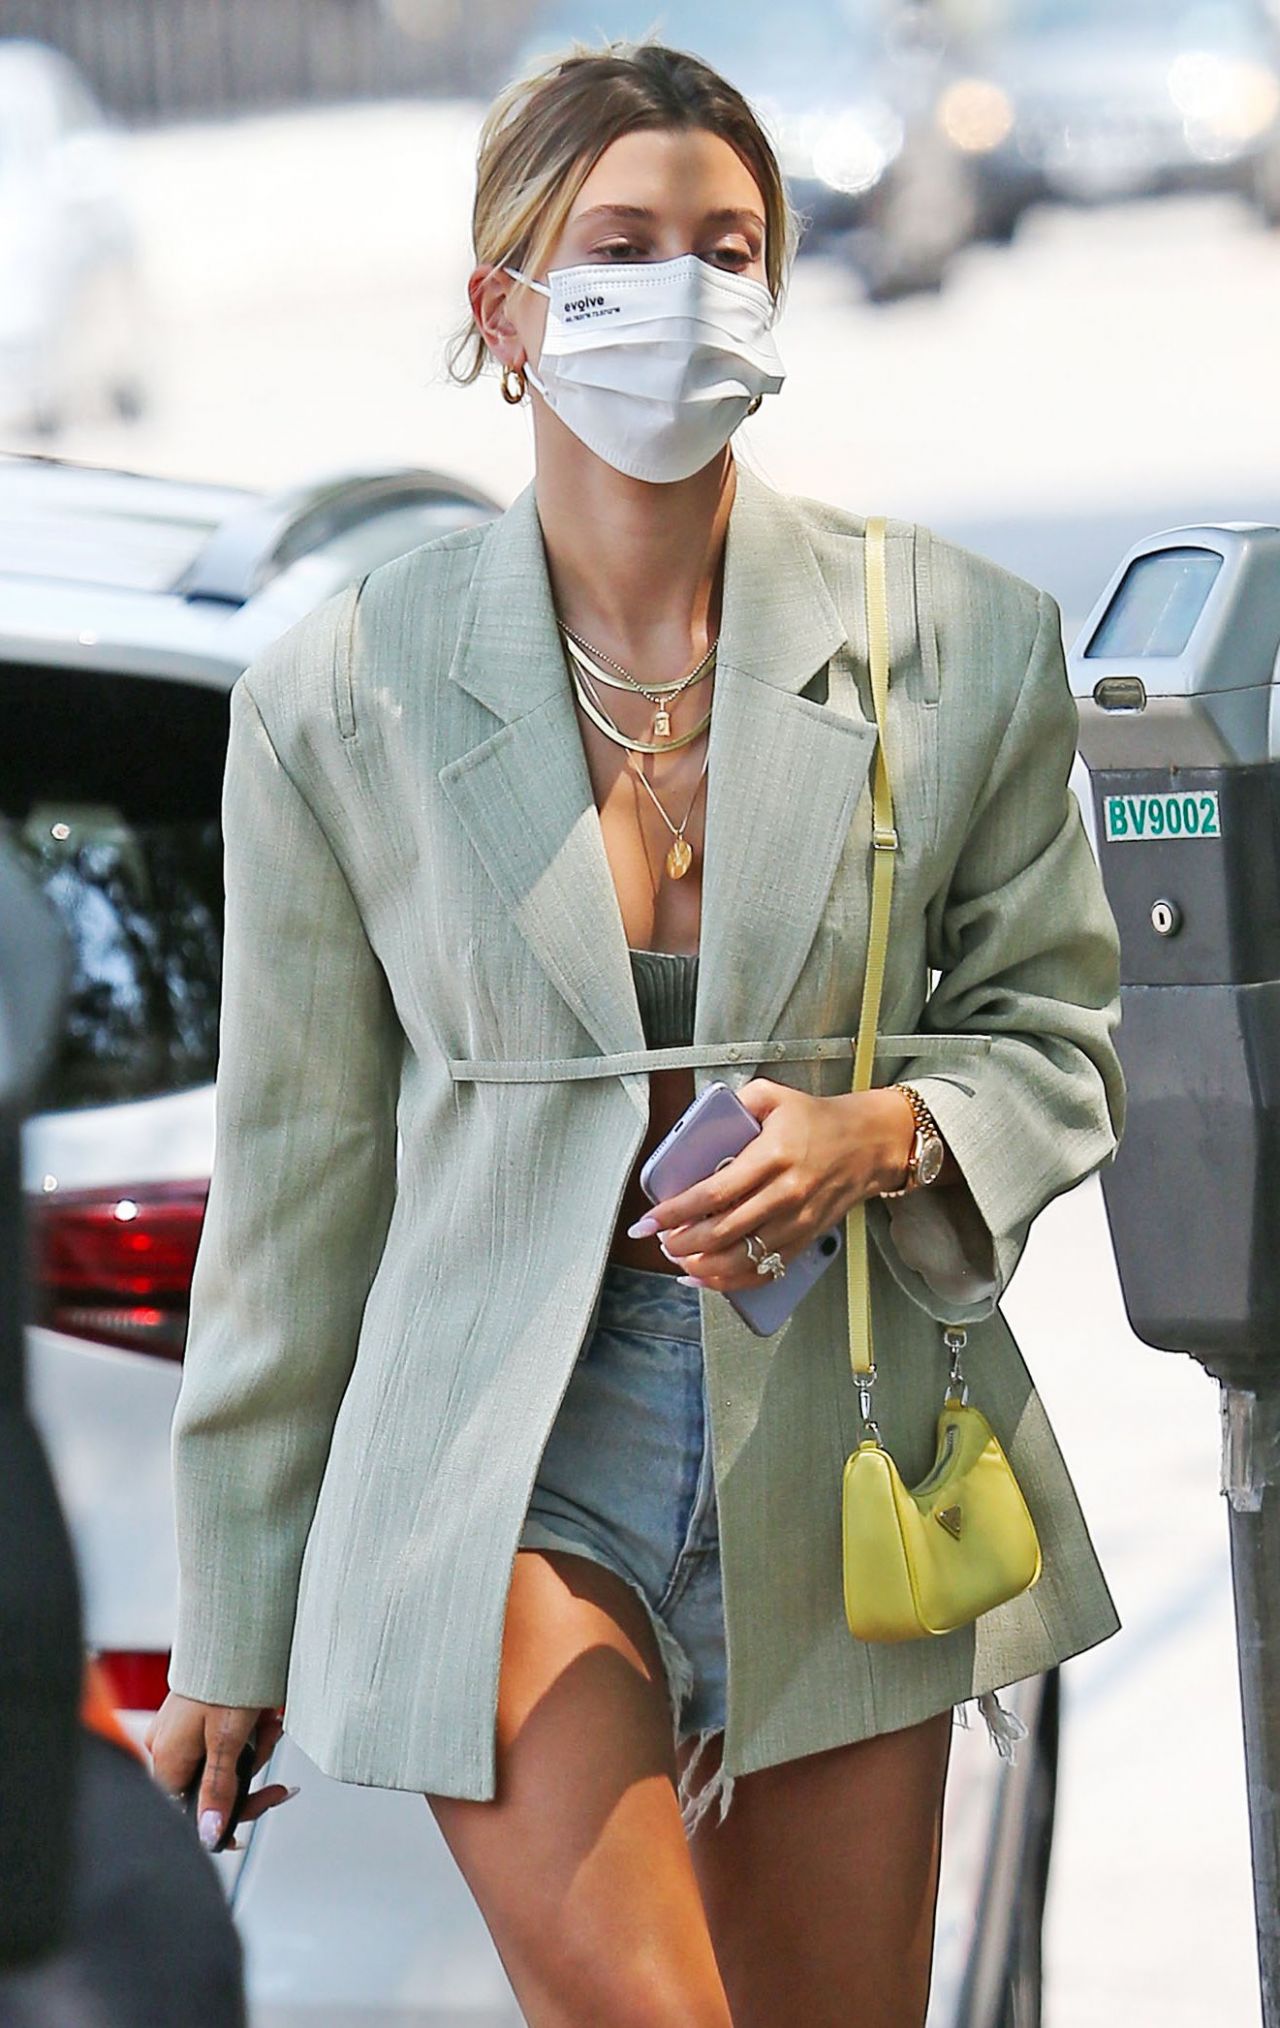 hailey-bieber-in-daisy-dukes-and-a-boxy-blazer-shopping-in-beverly-hills-08-20-2020-8.jpg